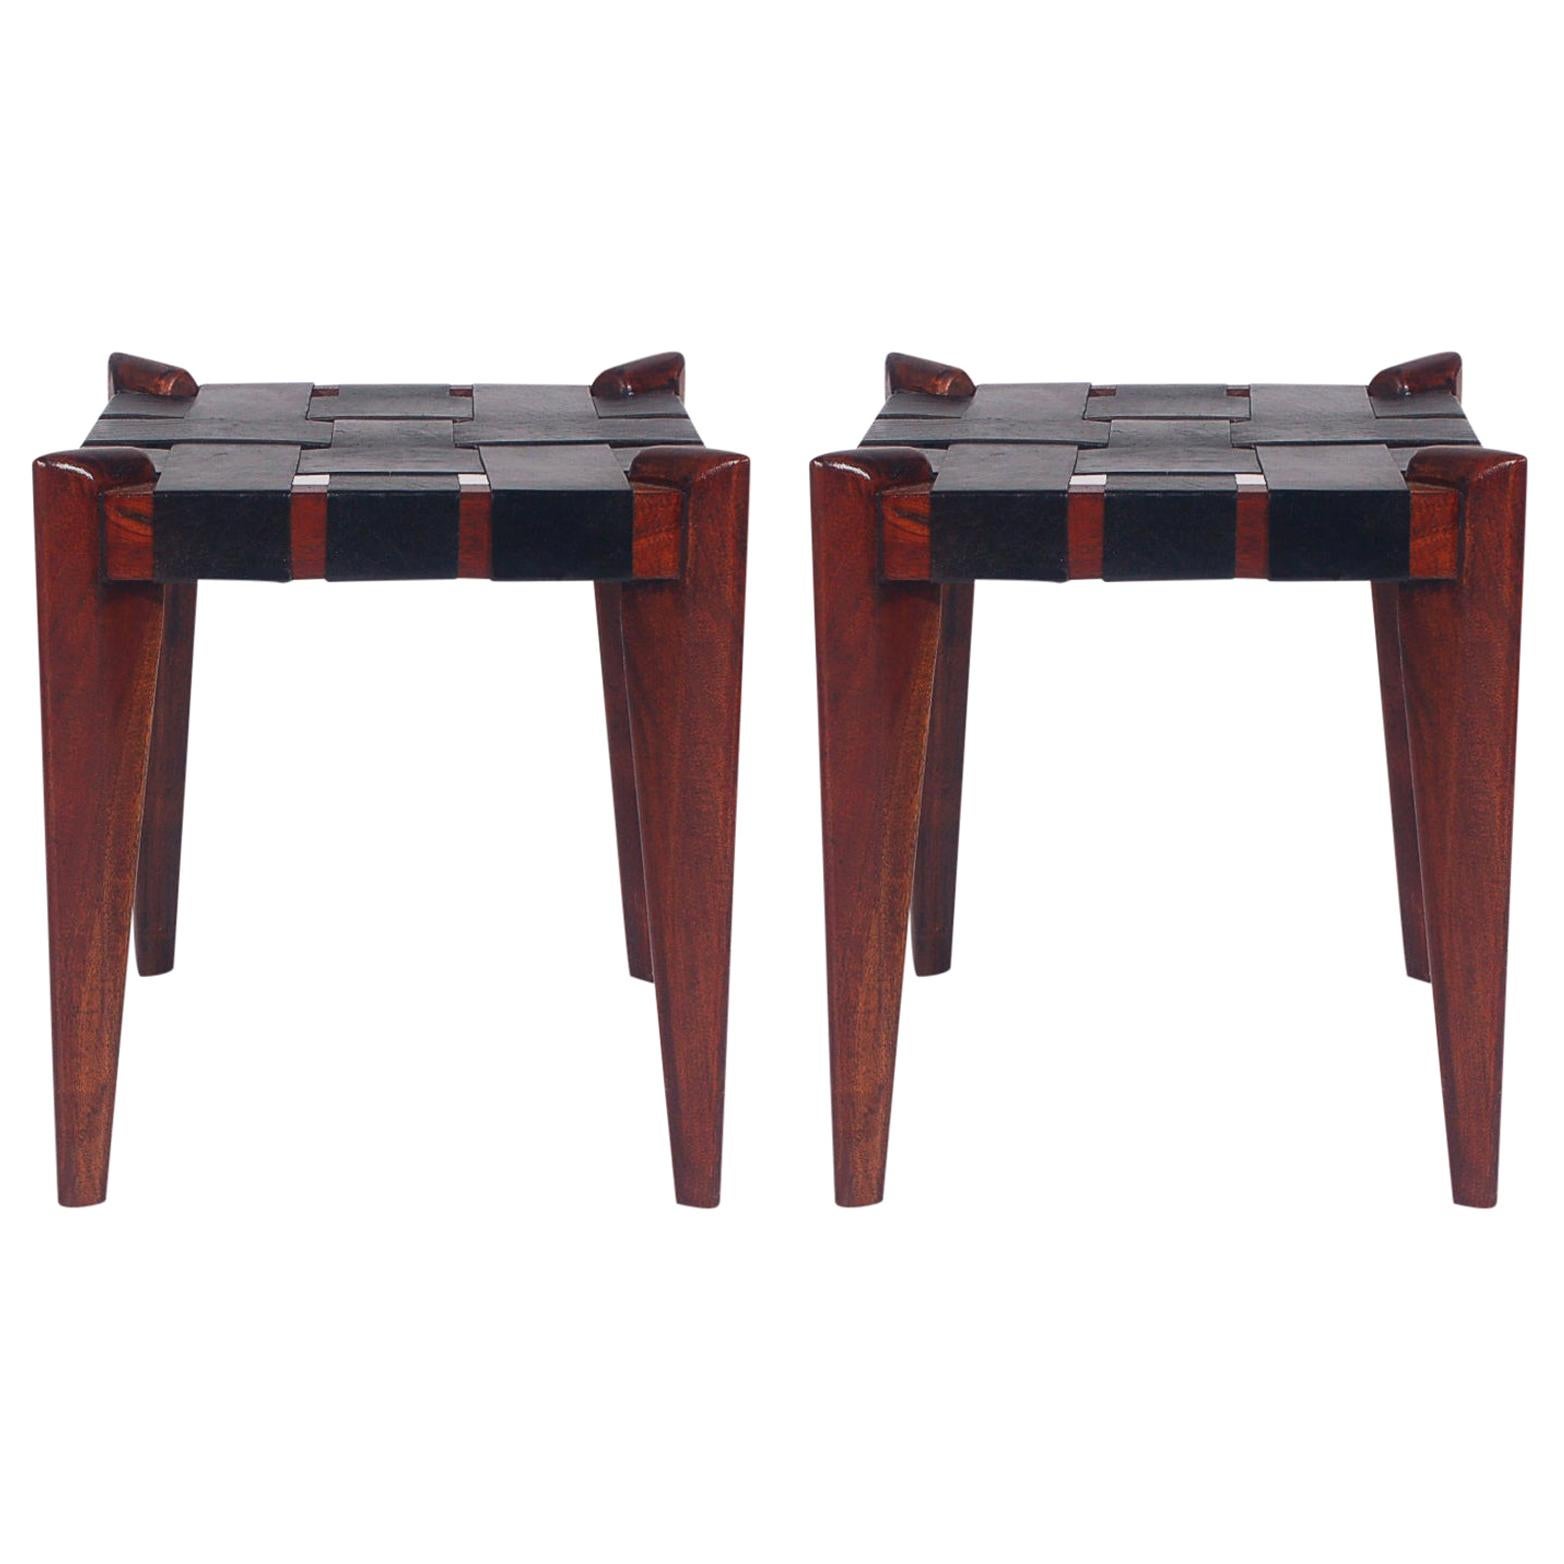 Pair of Midcentury Danish Modern Wood and Woven Black Leather Stools or Benches